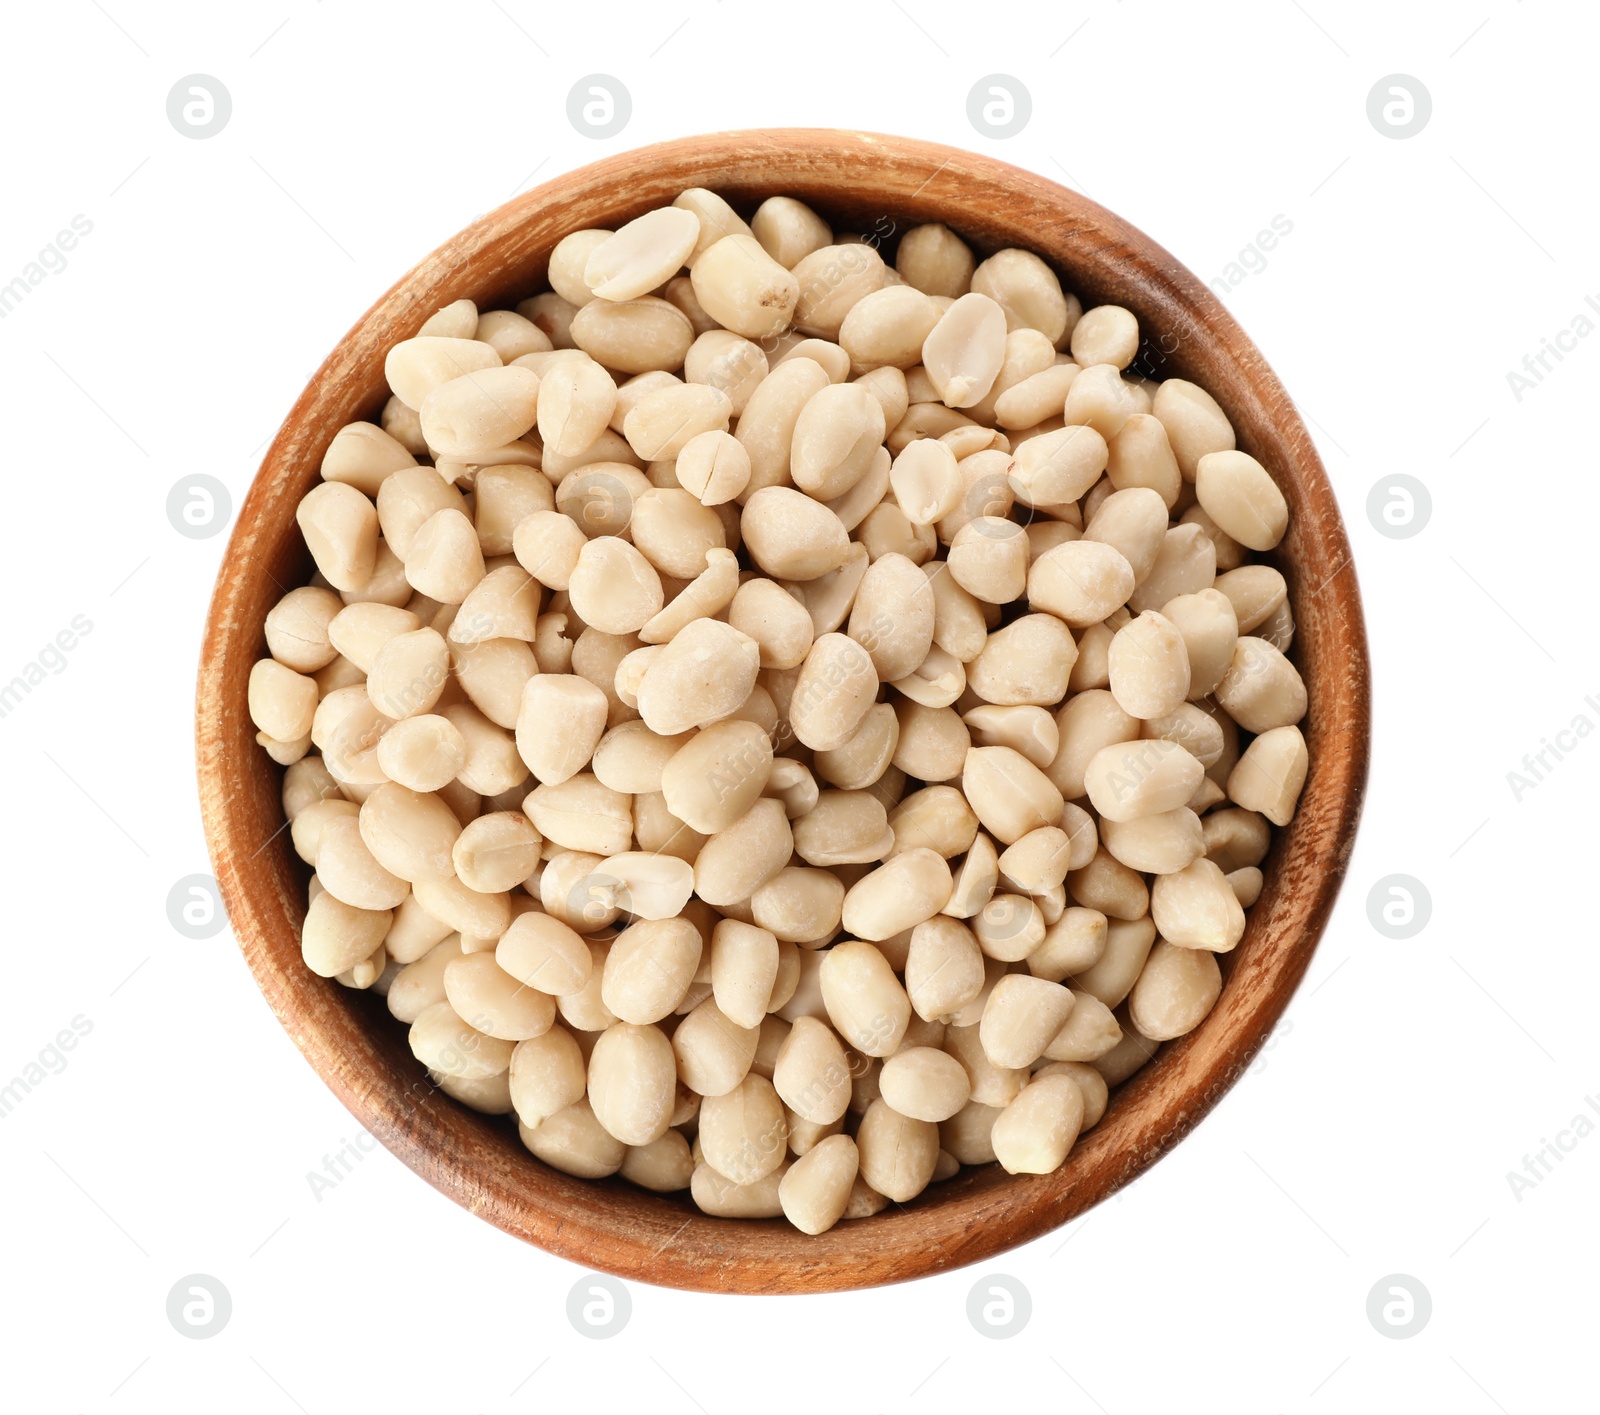 Photo of Shelled peanuts in bowl on white background, top view